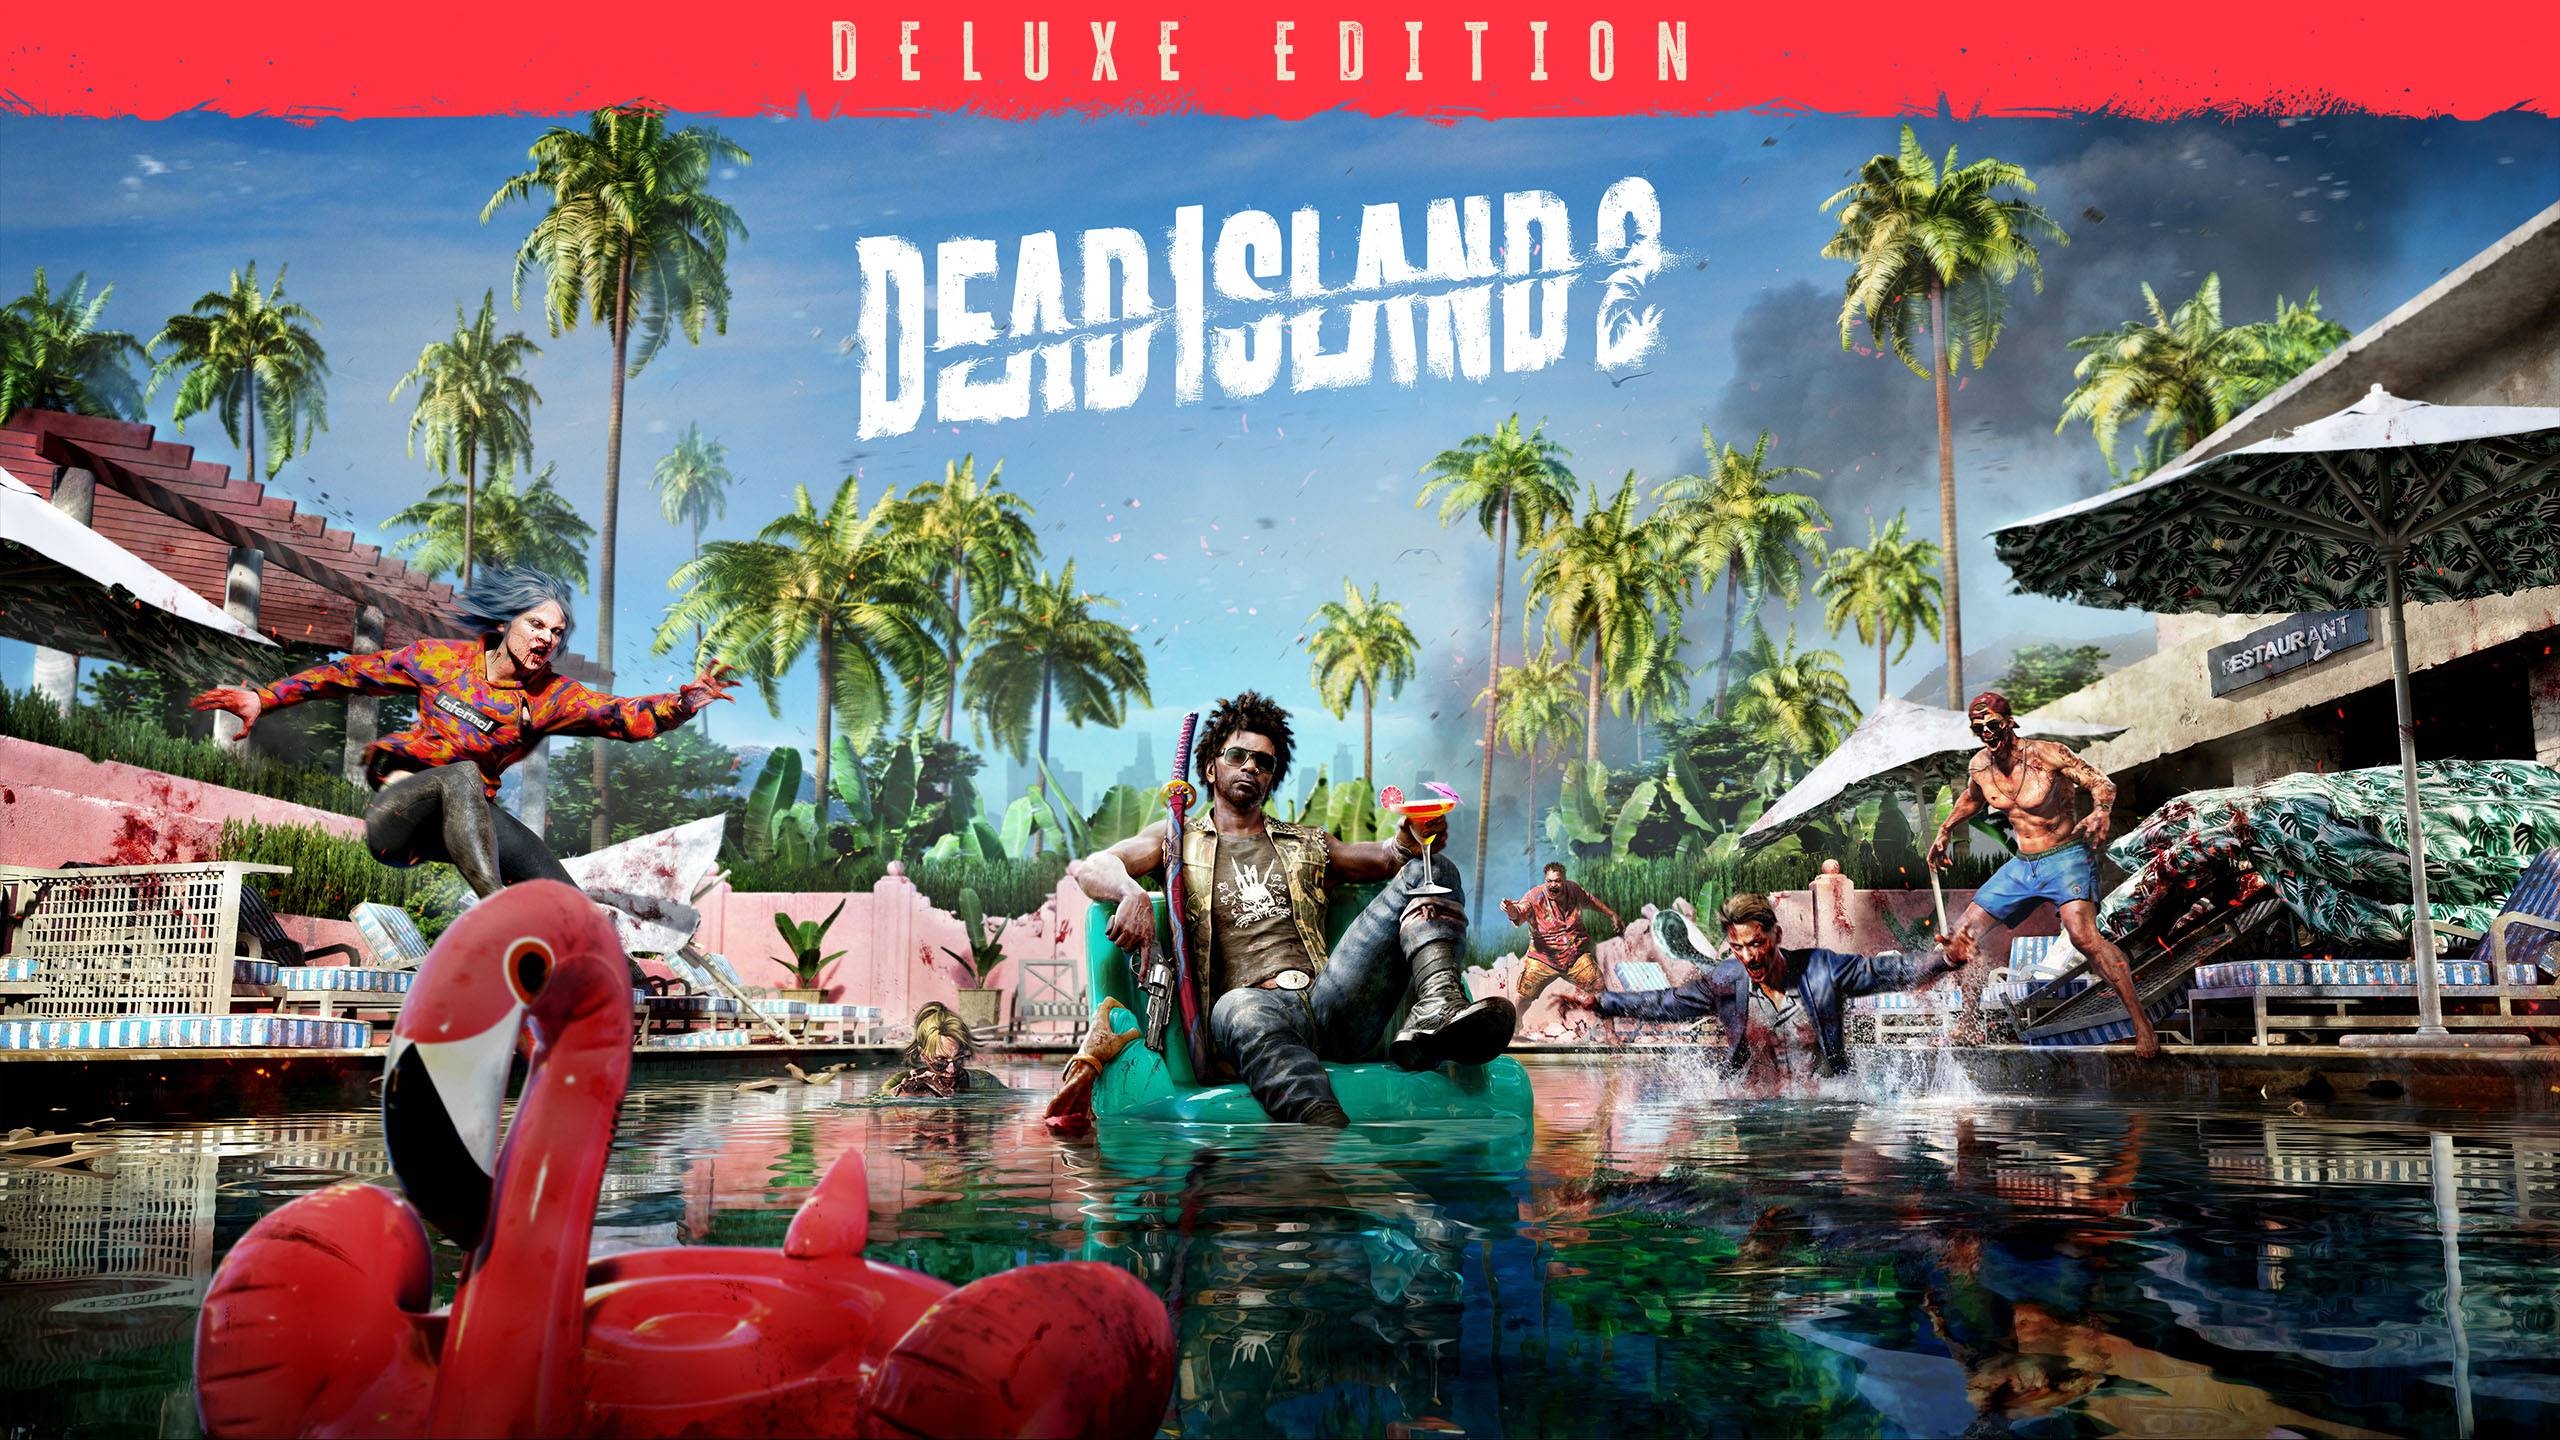 Dead Island 2 Deluxe Edition Xbox One, Xbox Series X, Xbox Series S  [Digital] G3Q-01452 - Best Buy